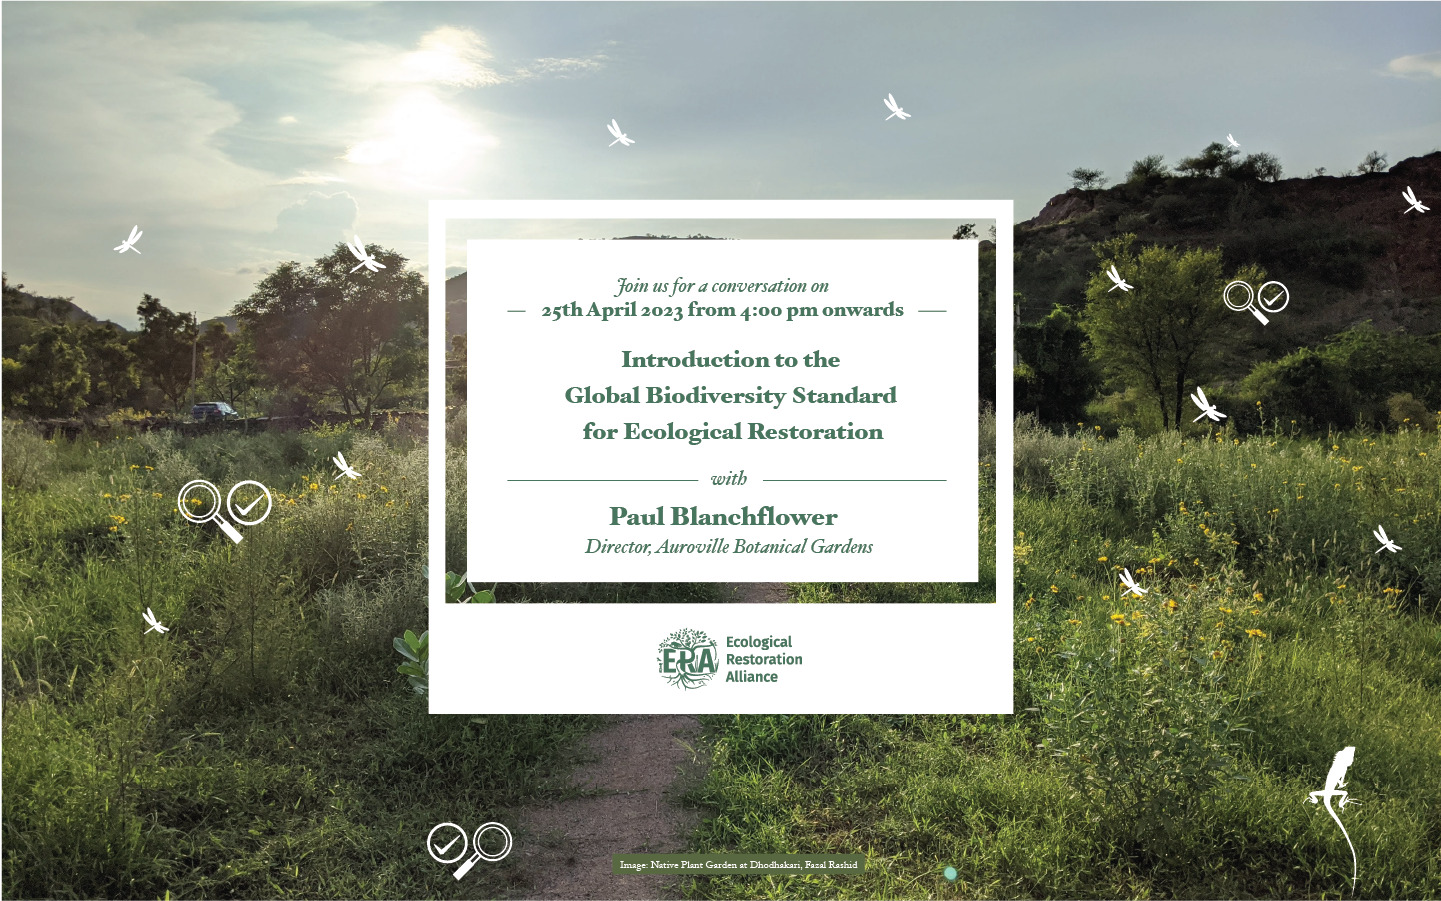 Introduction to the Global Biodiversity Standard for Ecological Restoration